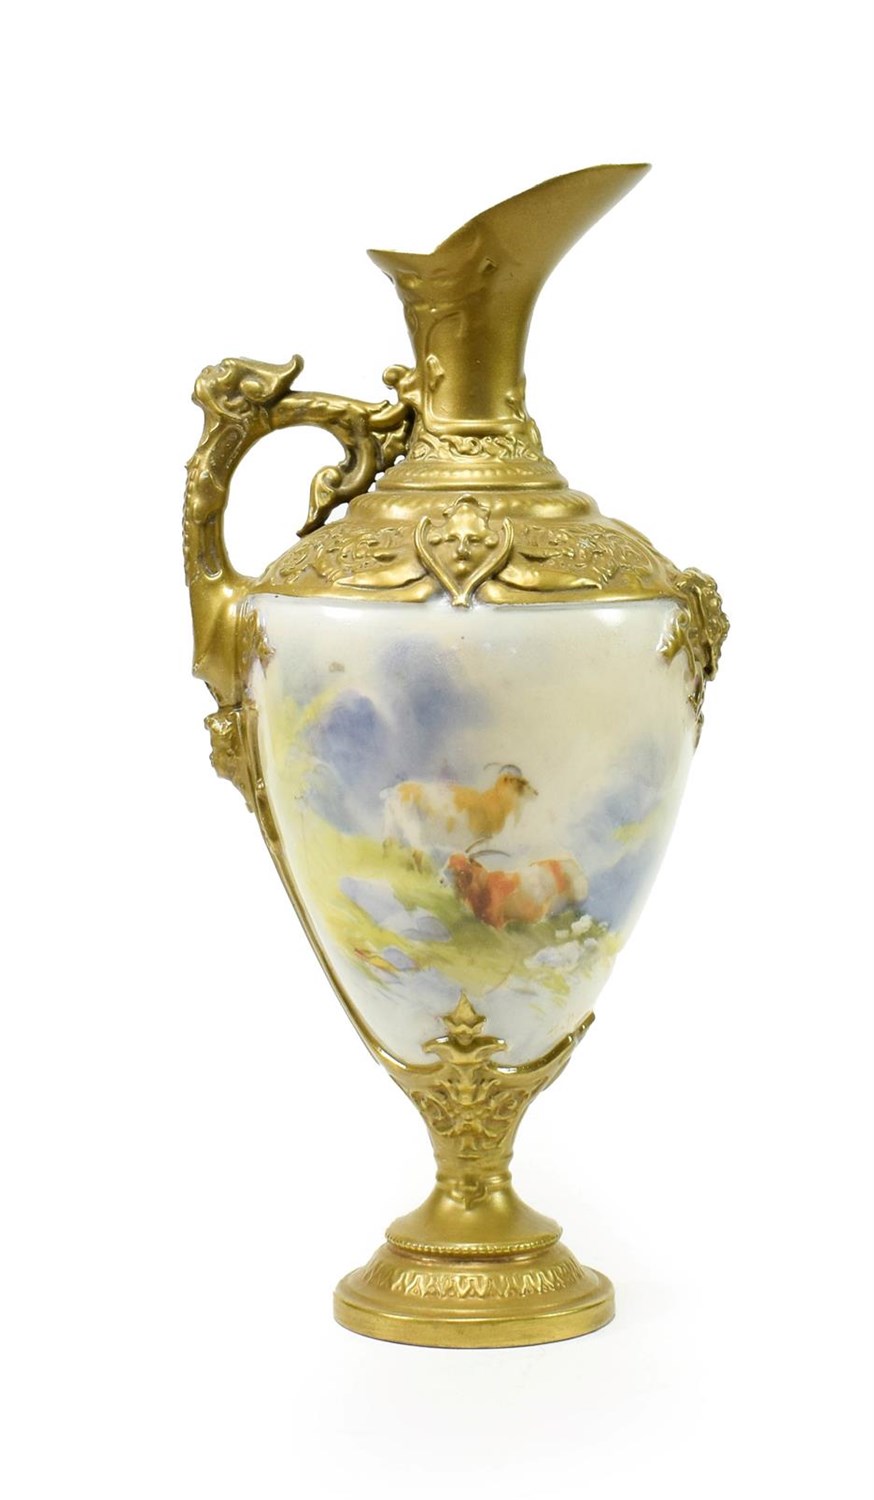 Lot 34 - ^ A Royal Worcester Porcelain Ewer, by Harry Davis, circa 1910, of urn shape with scroll and...